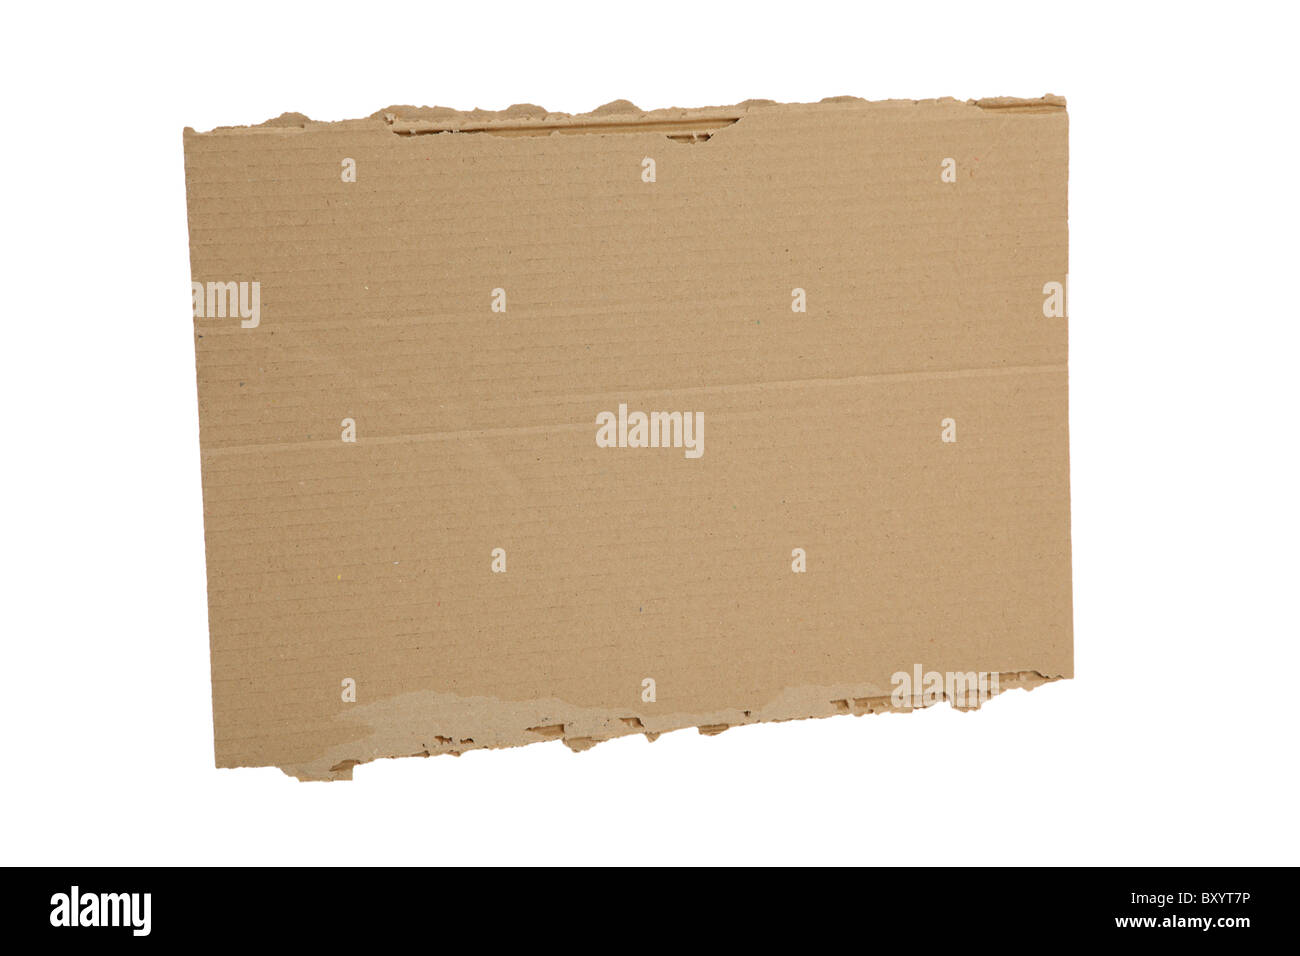 Blank cardboard sign on white background Stock Photo